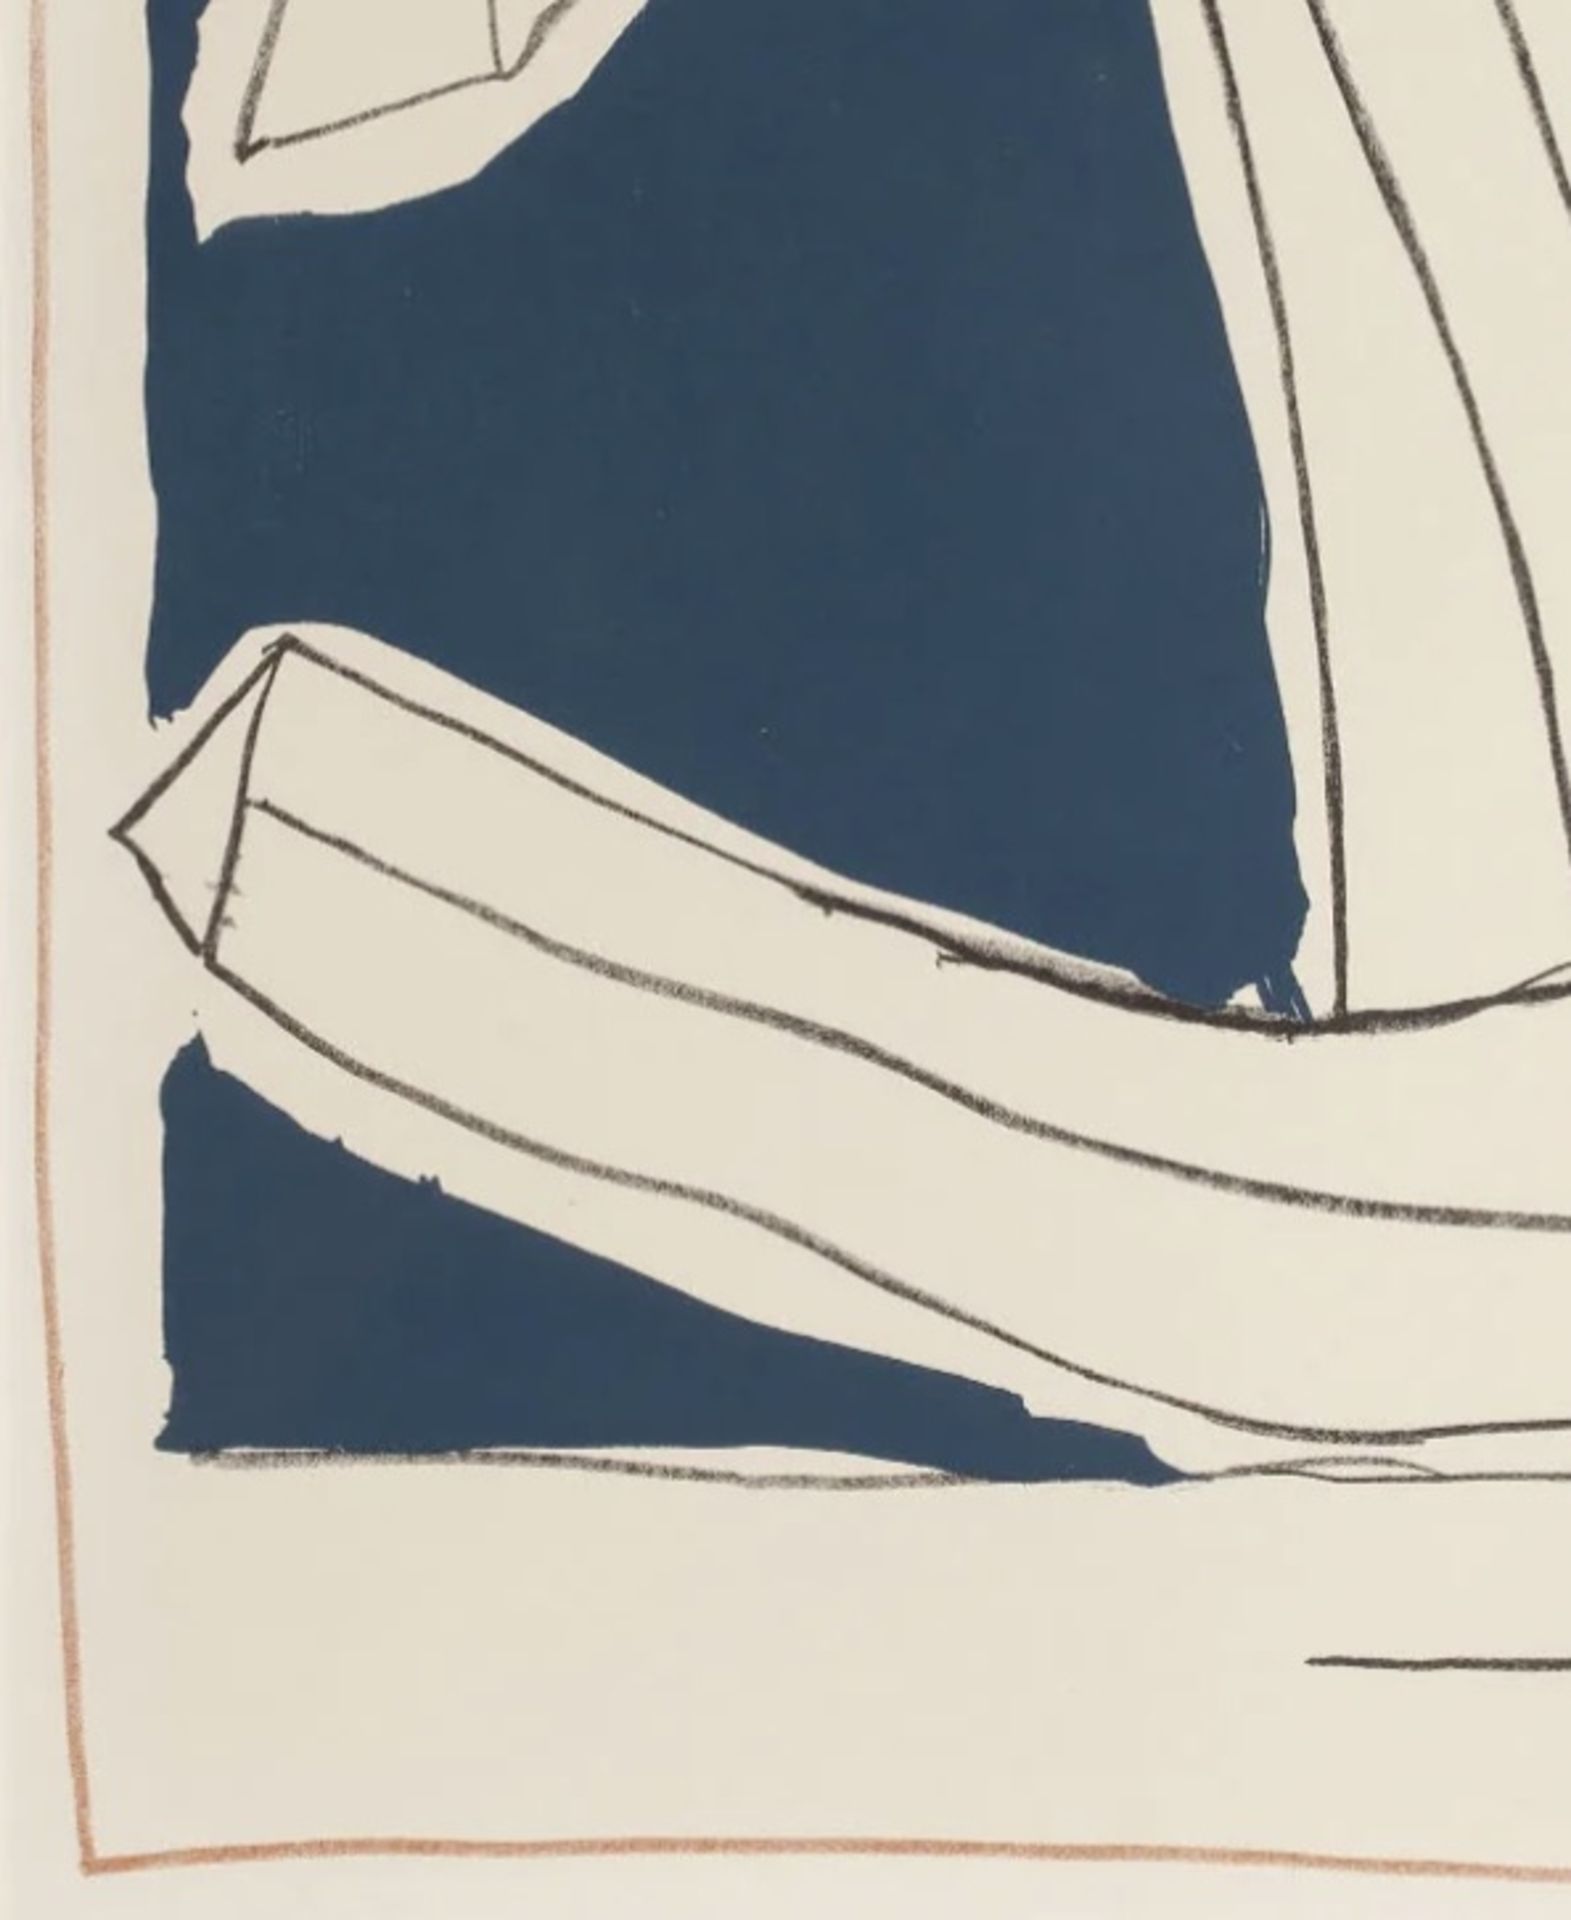 Robert Motherwell "Untitled" Offset Lithograph - Image 5 of 5